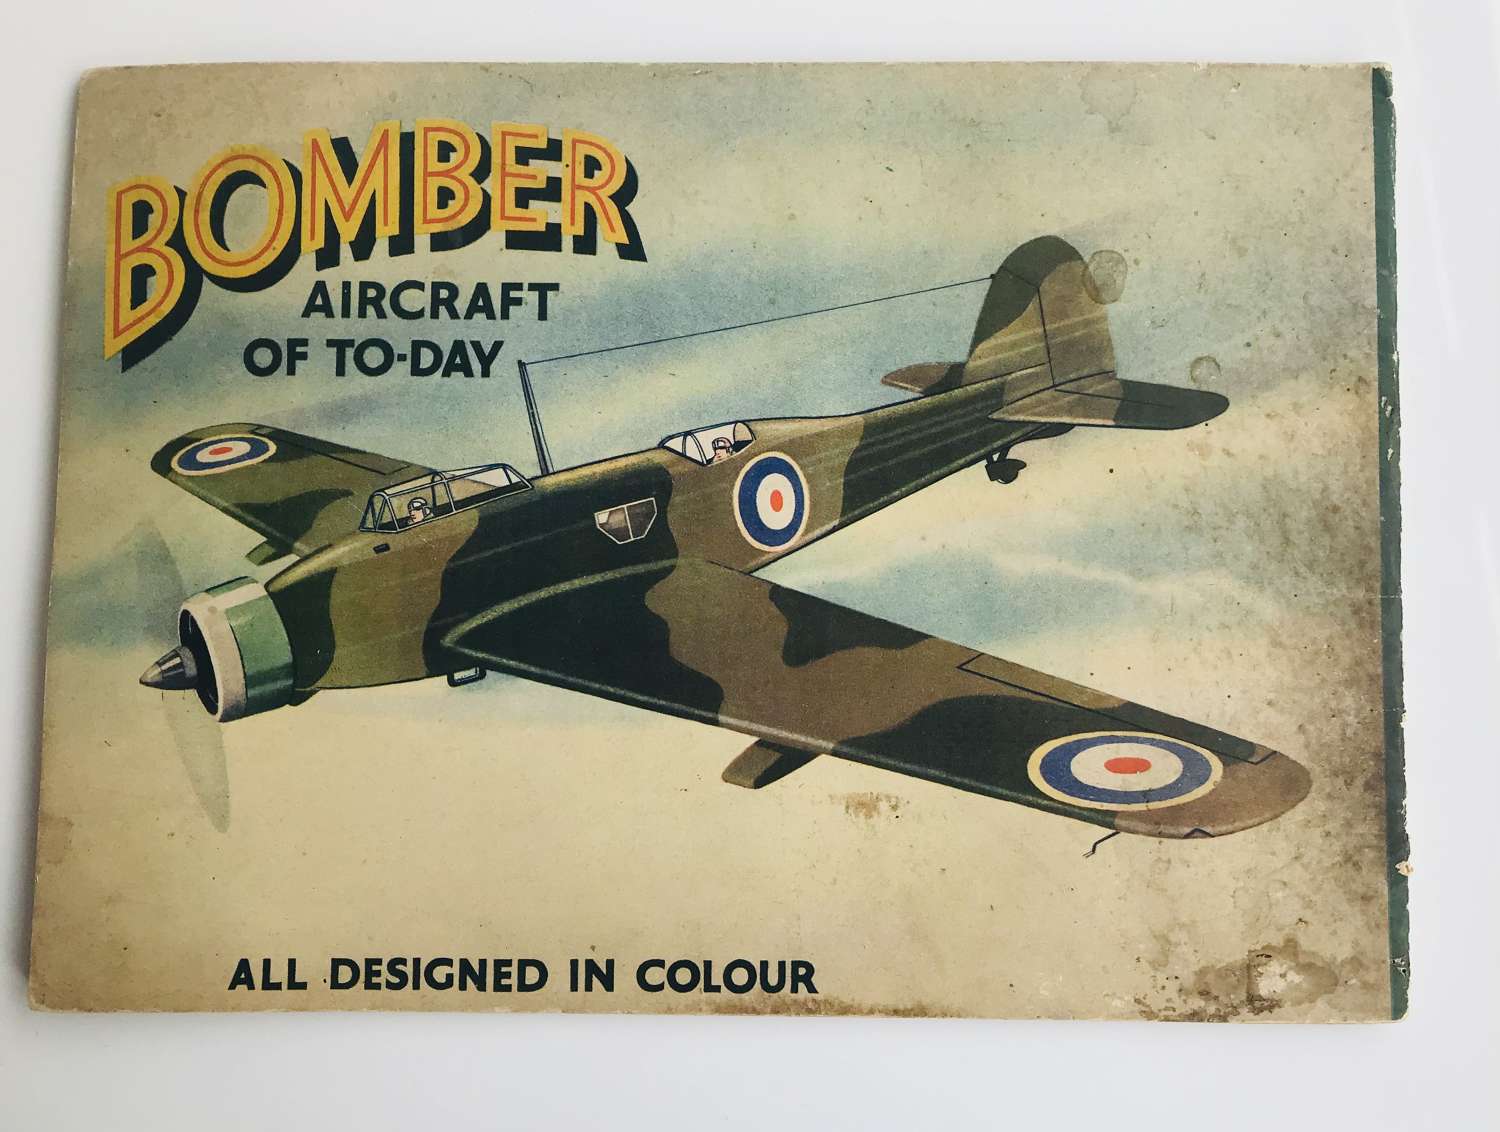 Bomber aircraft off today 1940